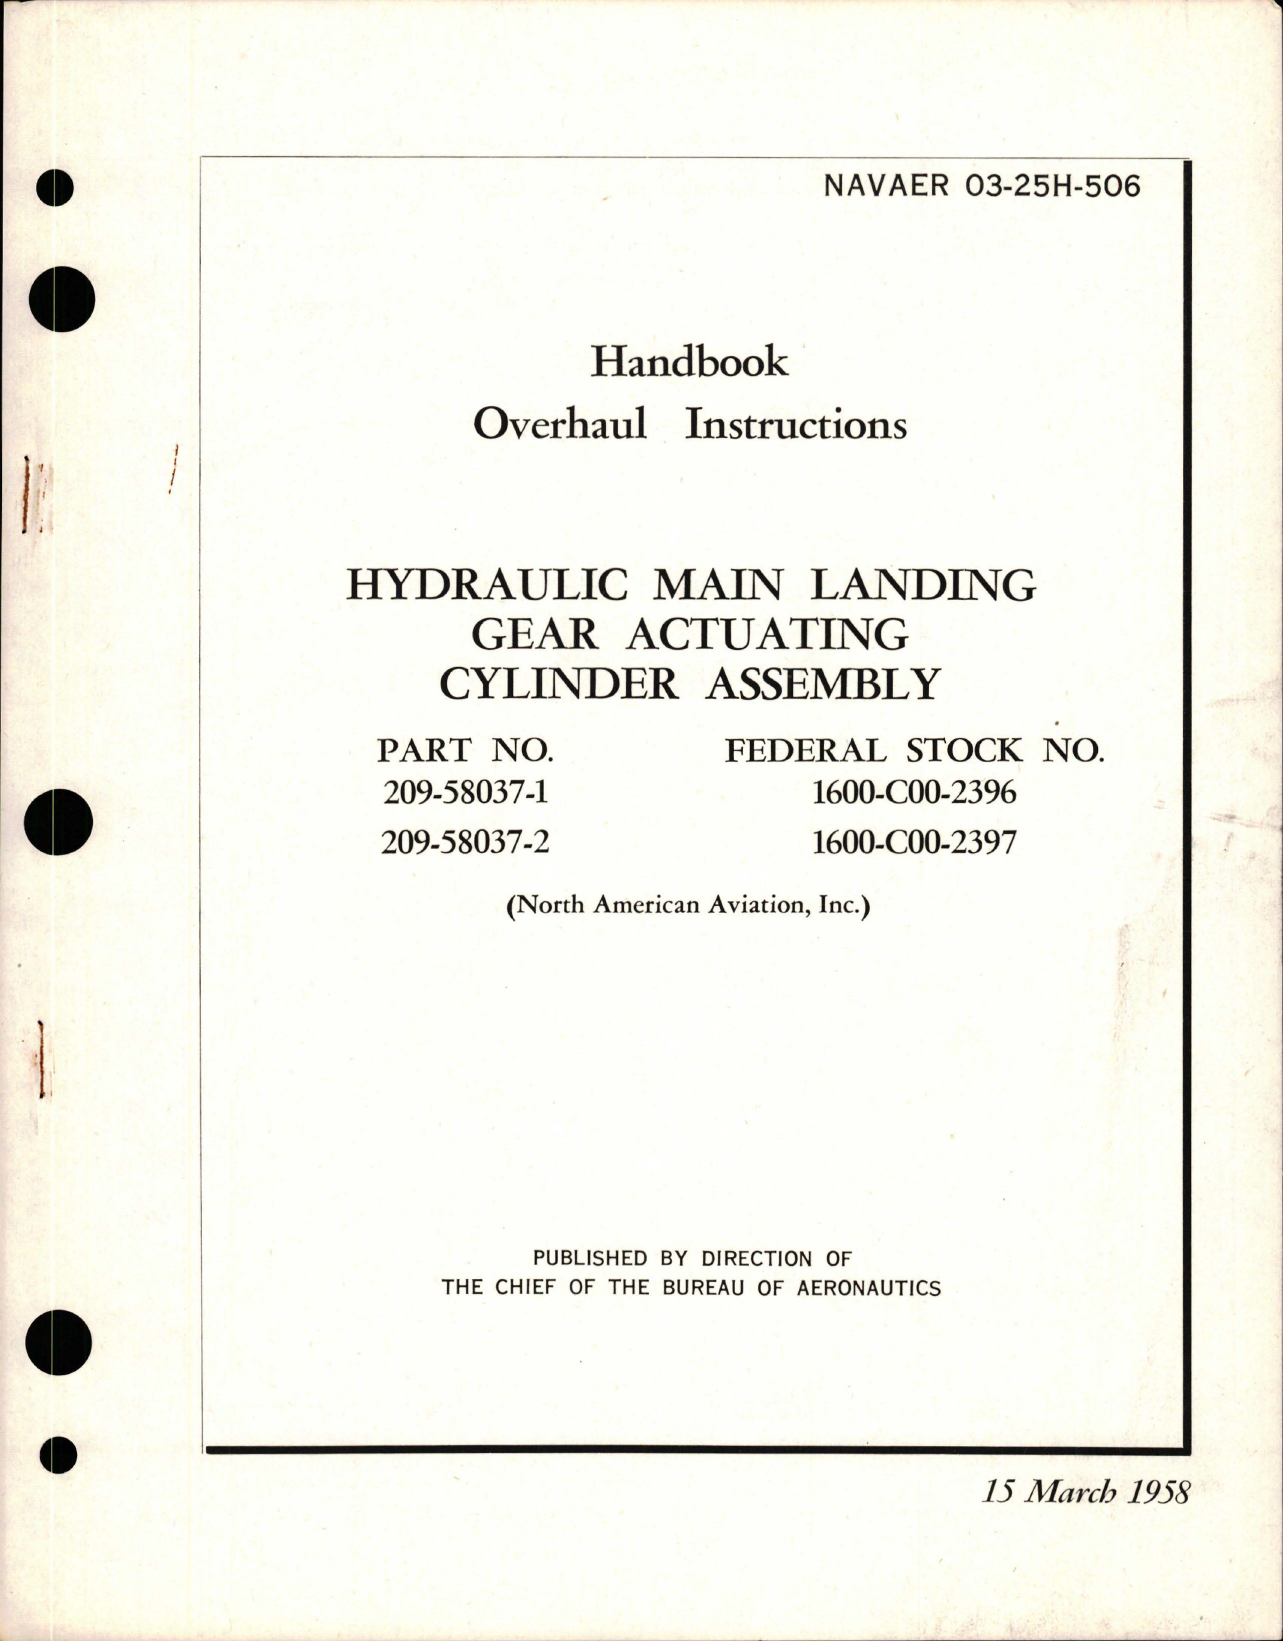 Sample page 1 from AirCorps Library document: Overhaul Instructions for Hydraulic Main Landing Gear Actuating Cylinder Assembly - Part 209-58037-1 and 209-58037-2